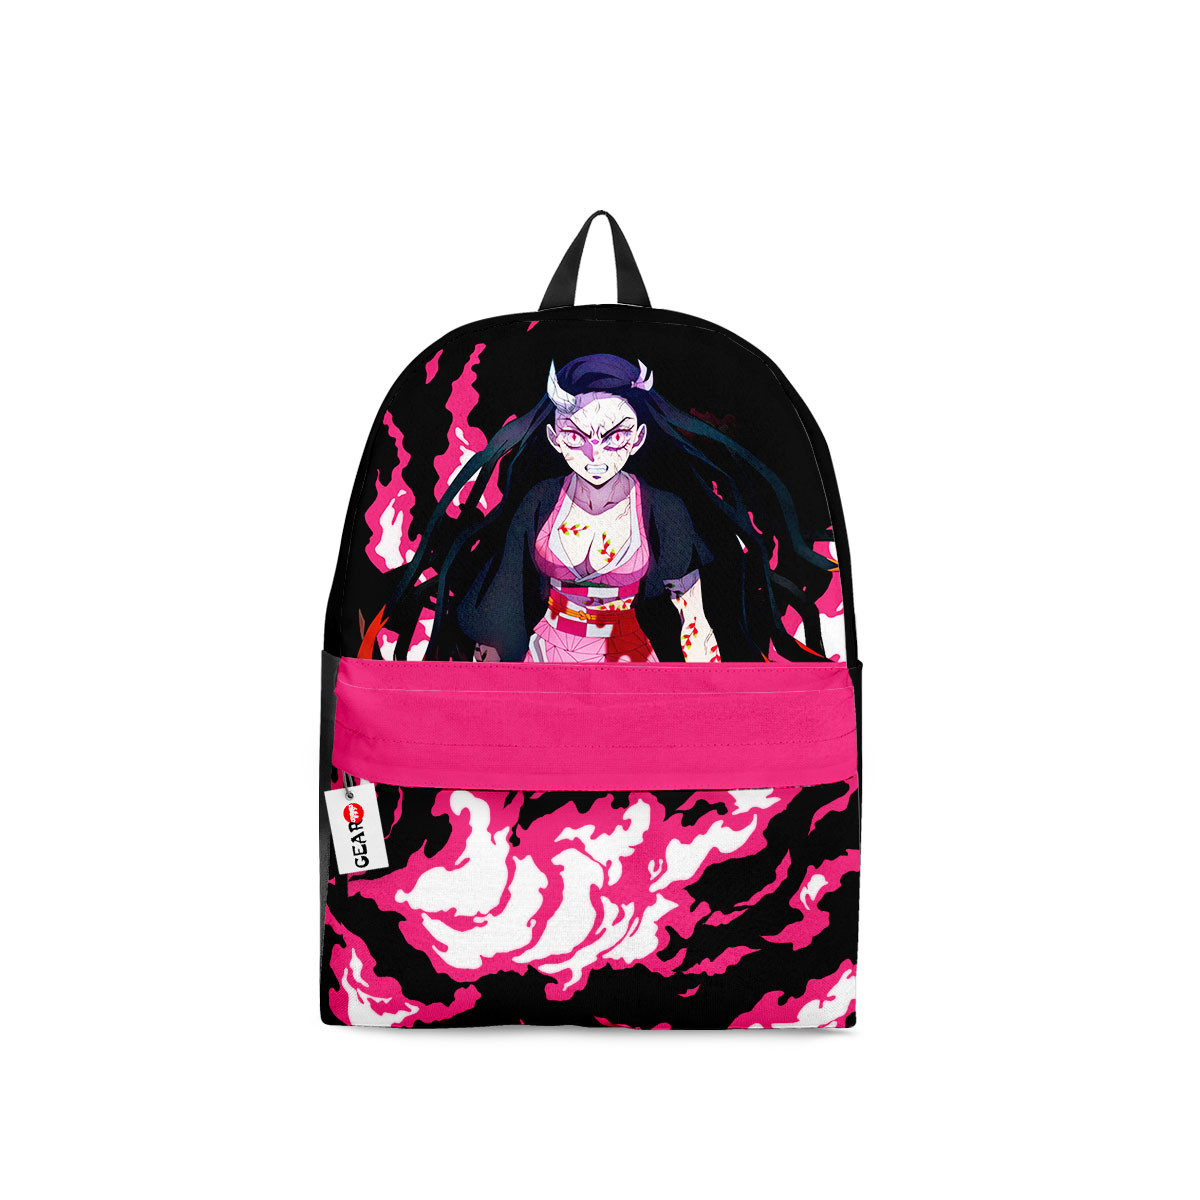 Latest Anime style products 122